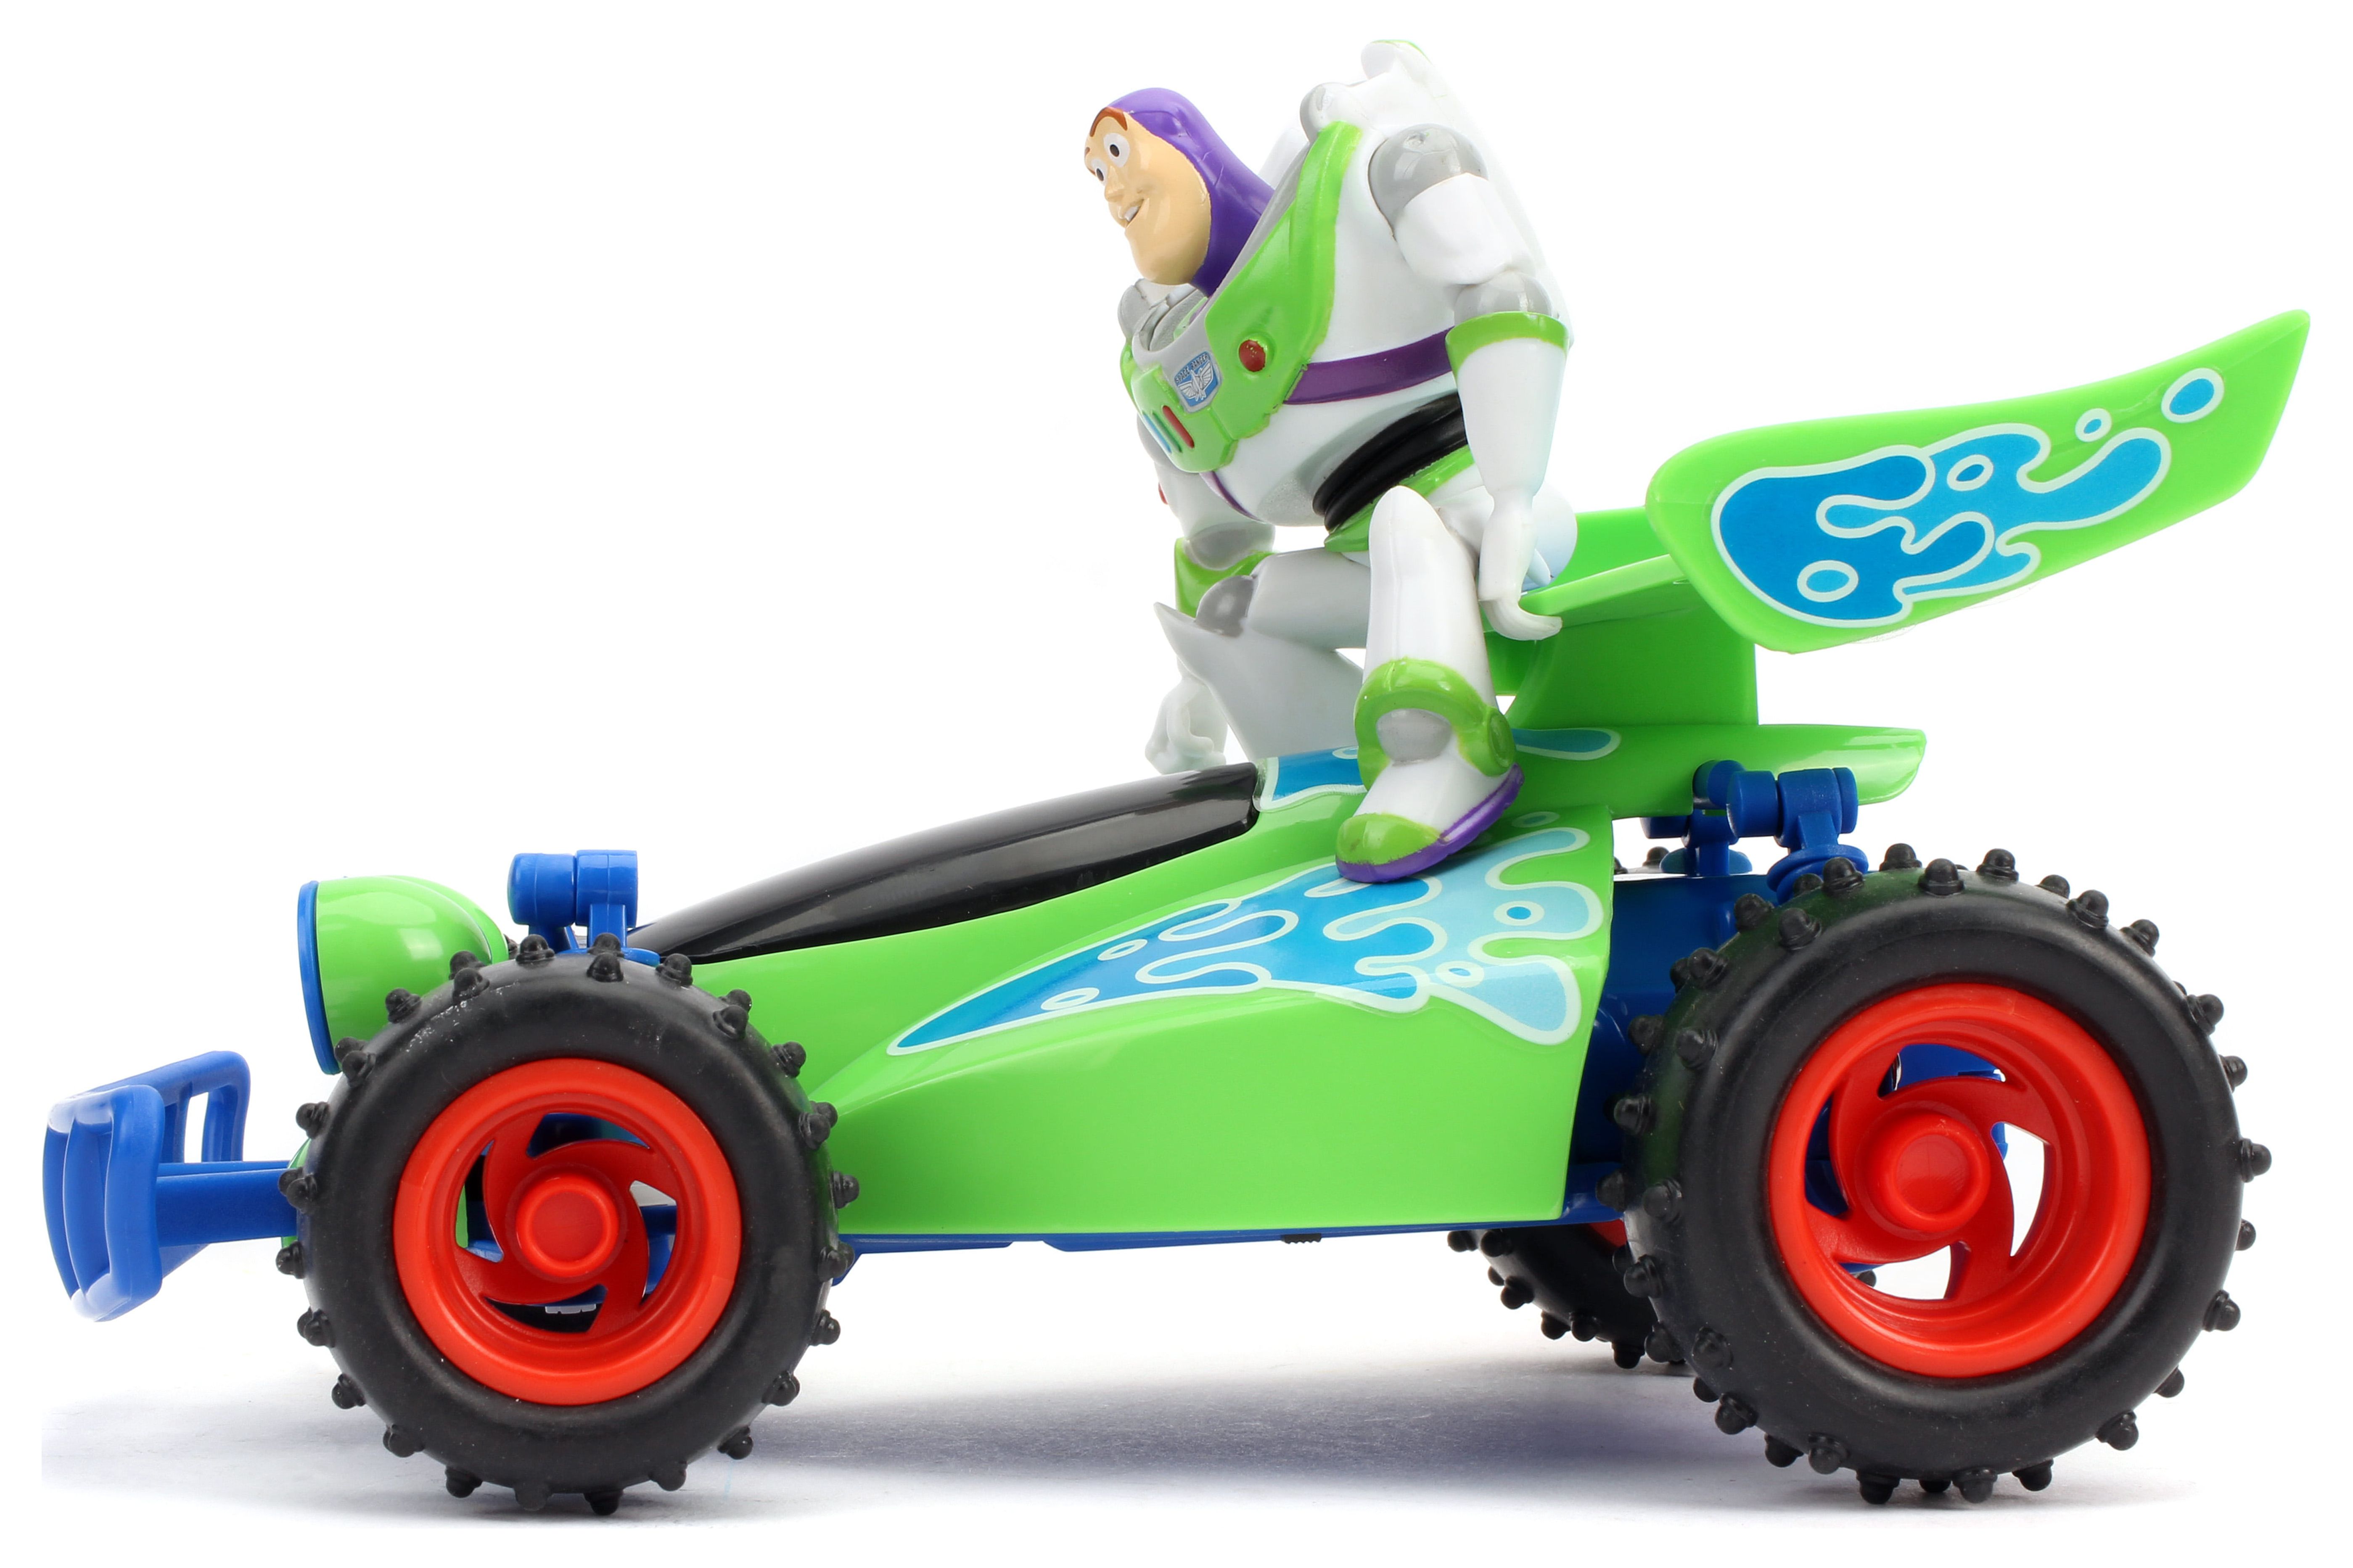 Disney Pixar Toy Story (1:24) Turbo Buggy Battery-Powered RC Car, Buzz Lightyear - image 2 of 2